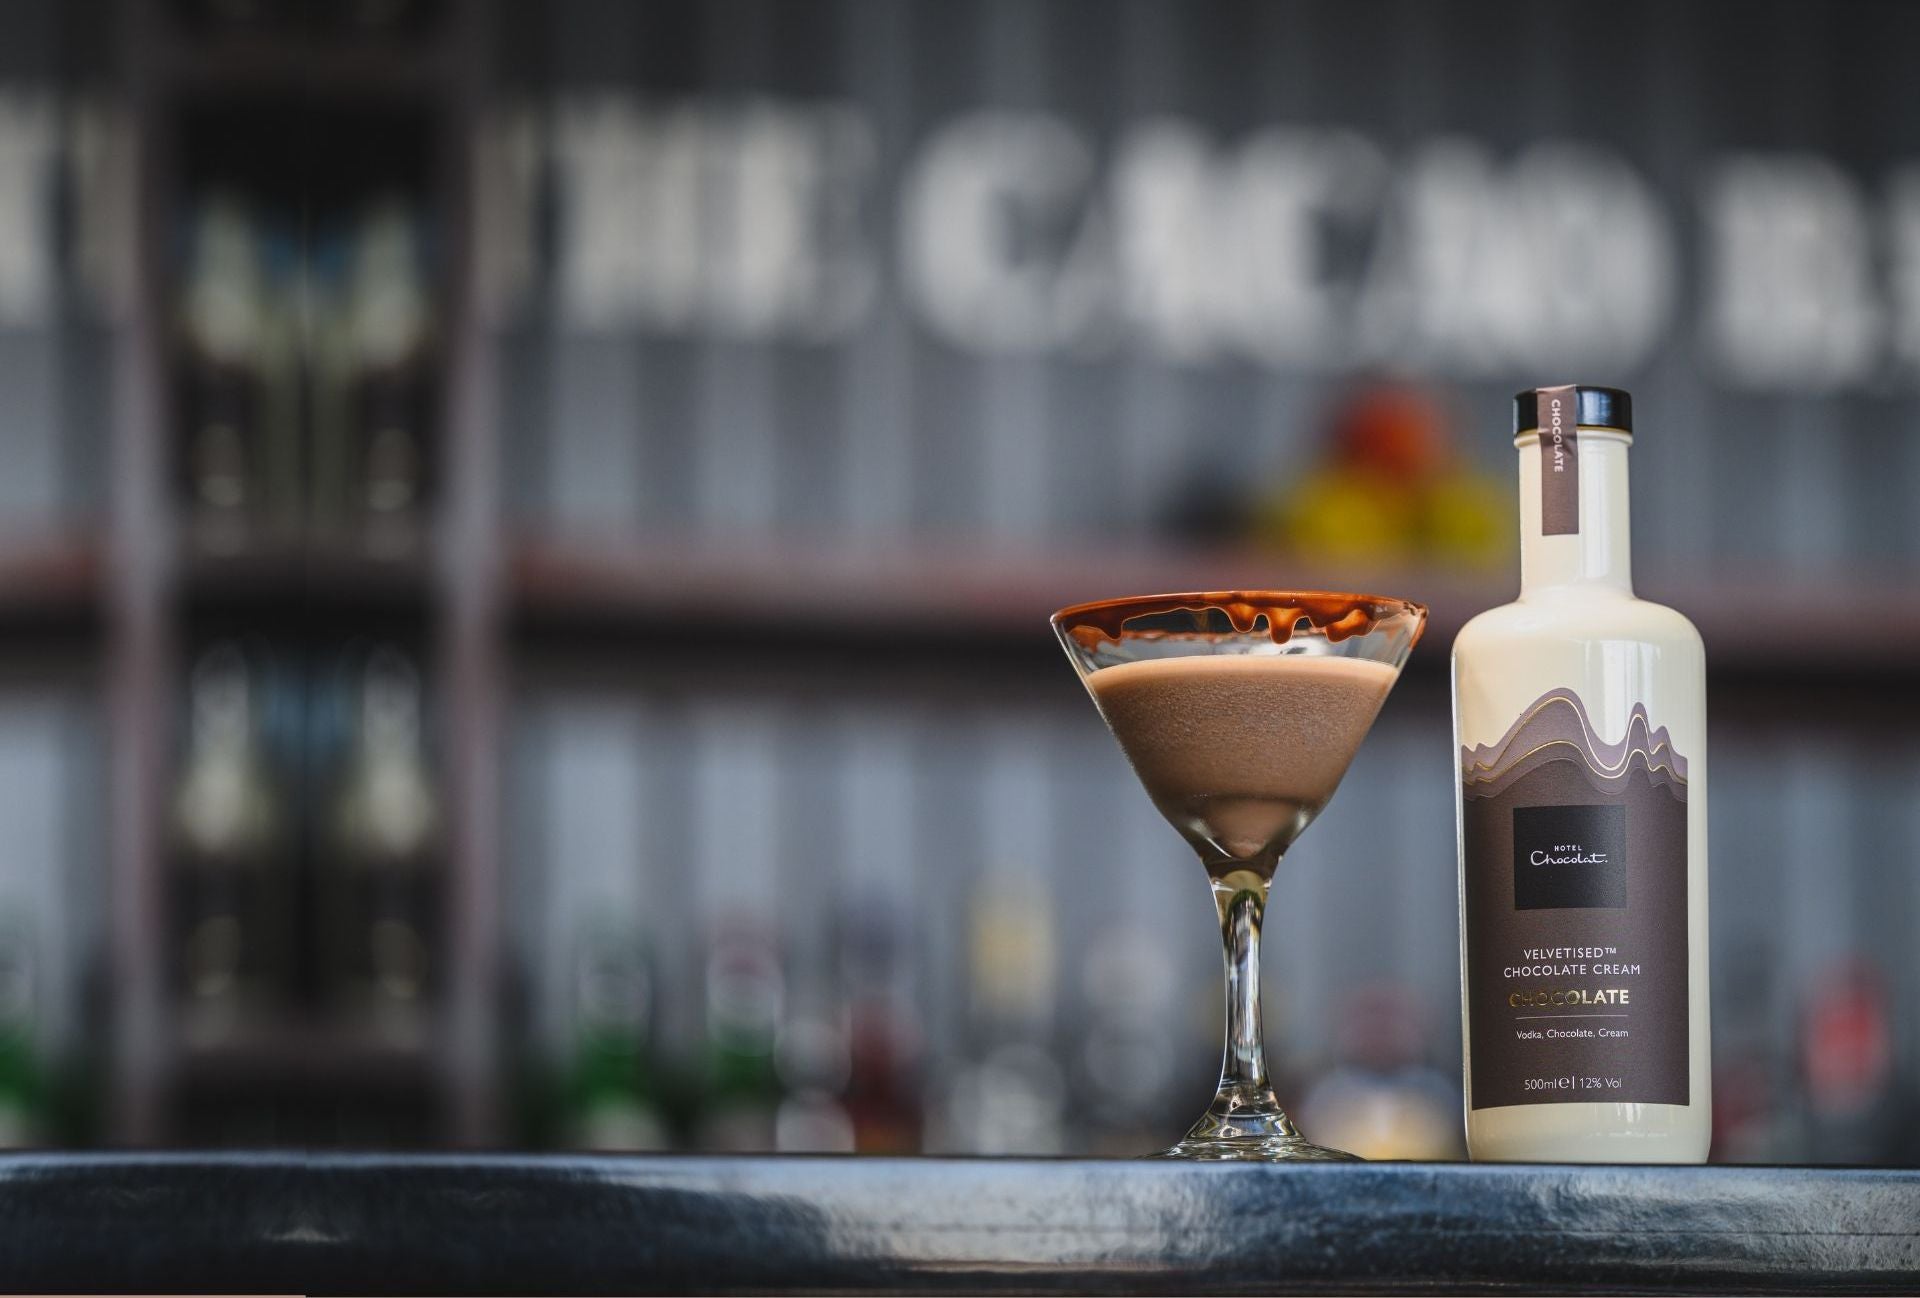 A chocolate martini sits on a bar, next to a bottle of Hotel Chocolat's velvetised cream liqueur.